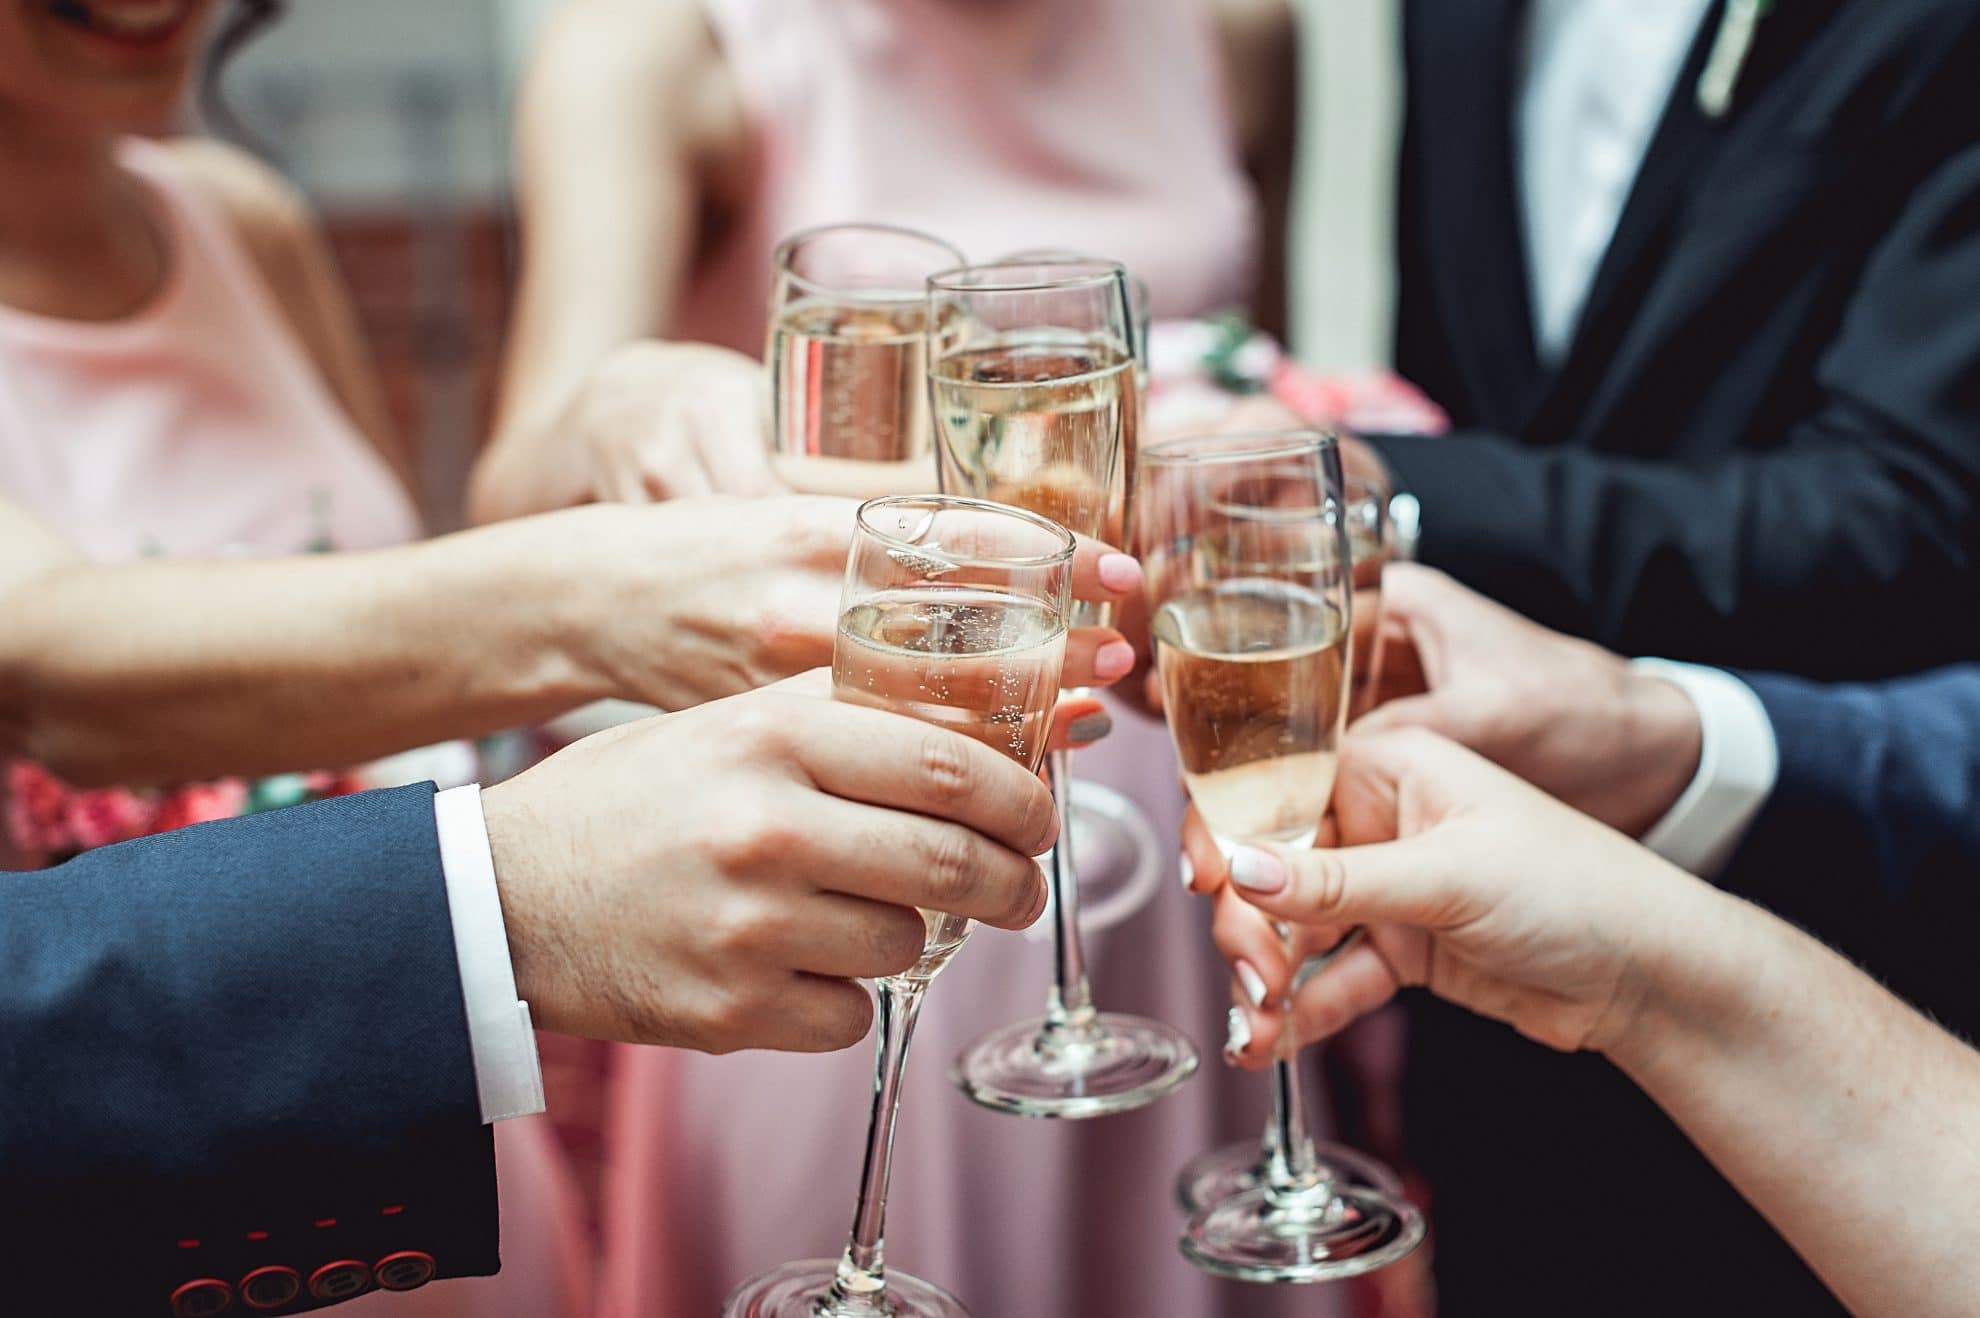 Champagne glasses are held together toasting. Image used in the How To Write The Perfect Best Man Speech and Nail It article.